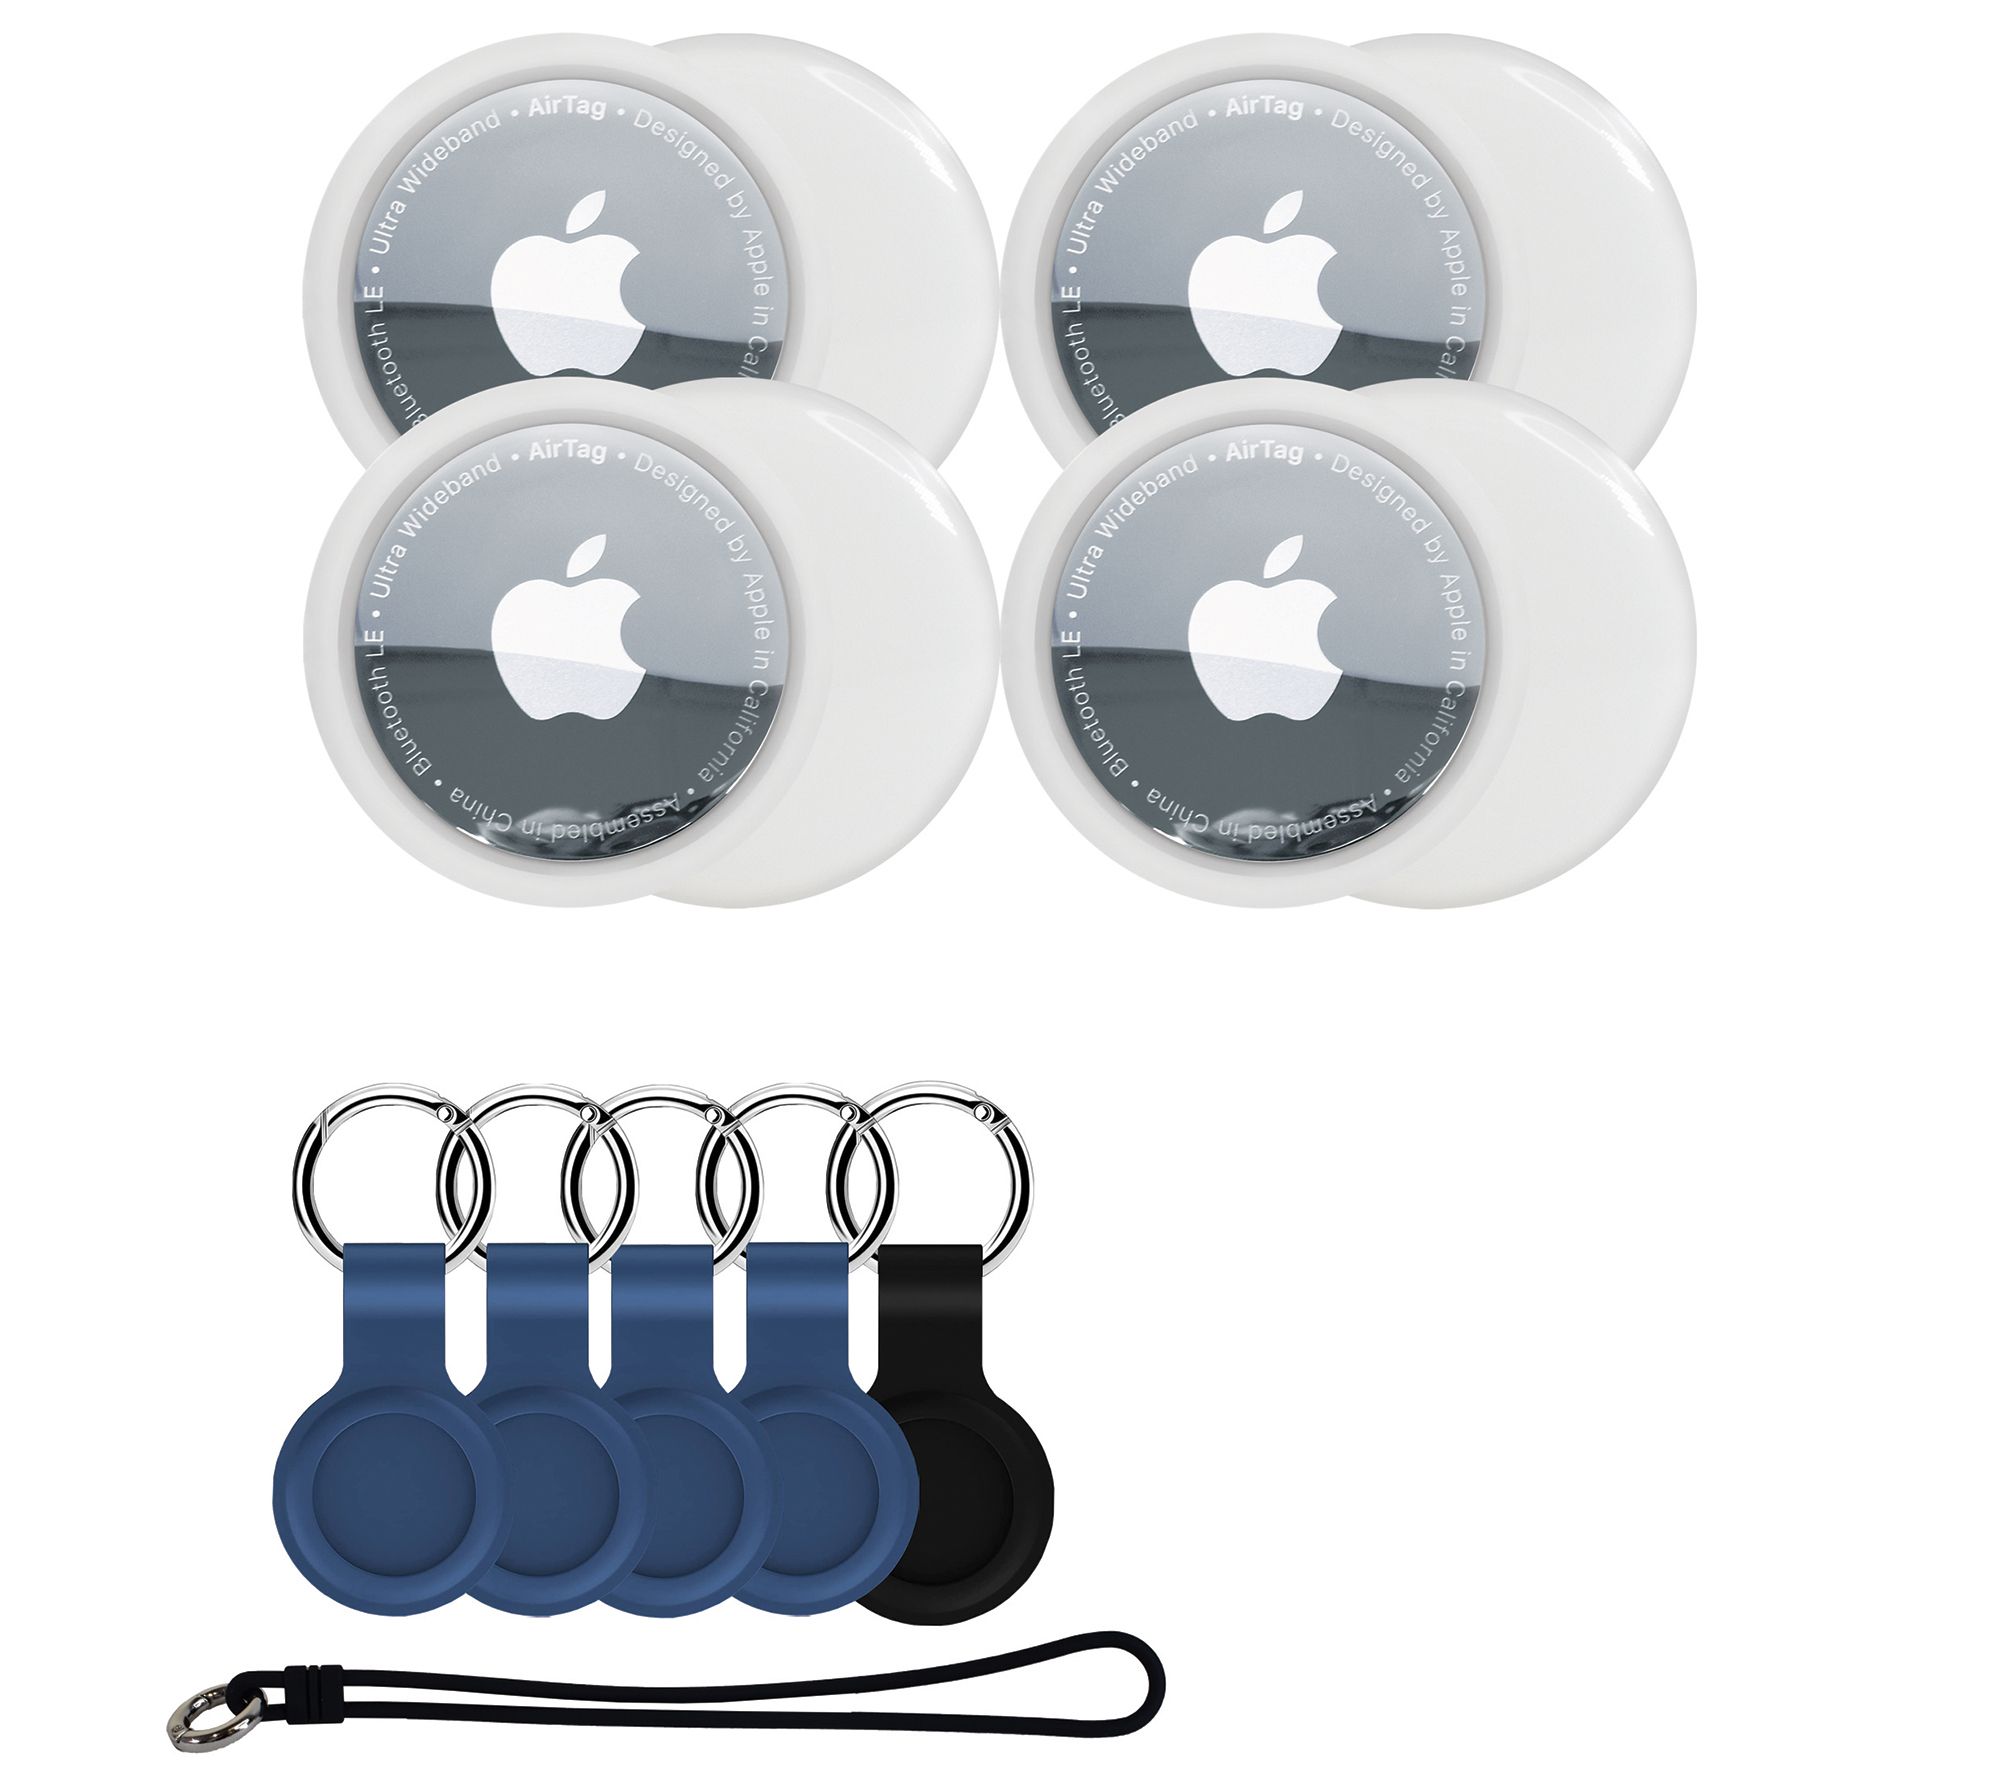 Apple AirTags 4-pack with Luggage Strap and Colored Keychains